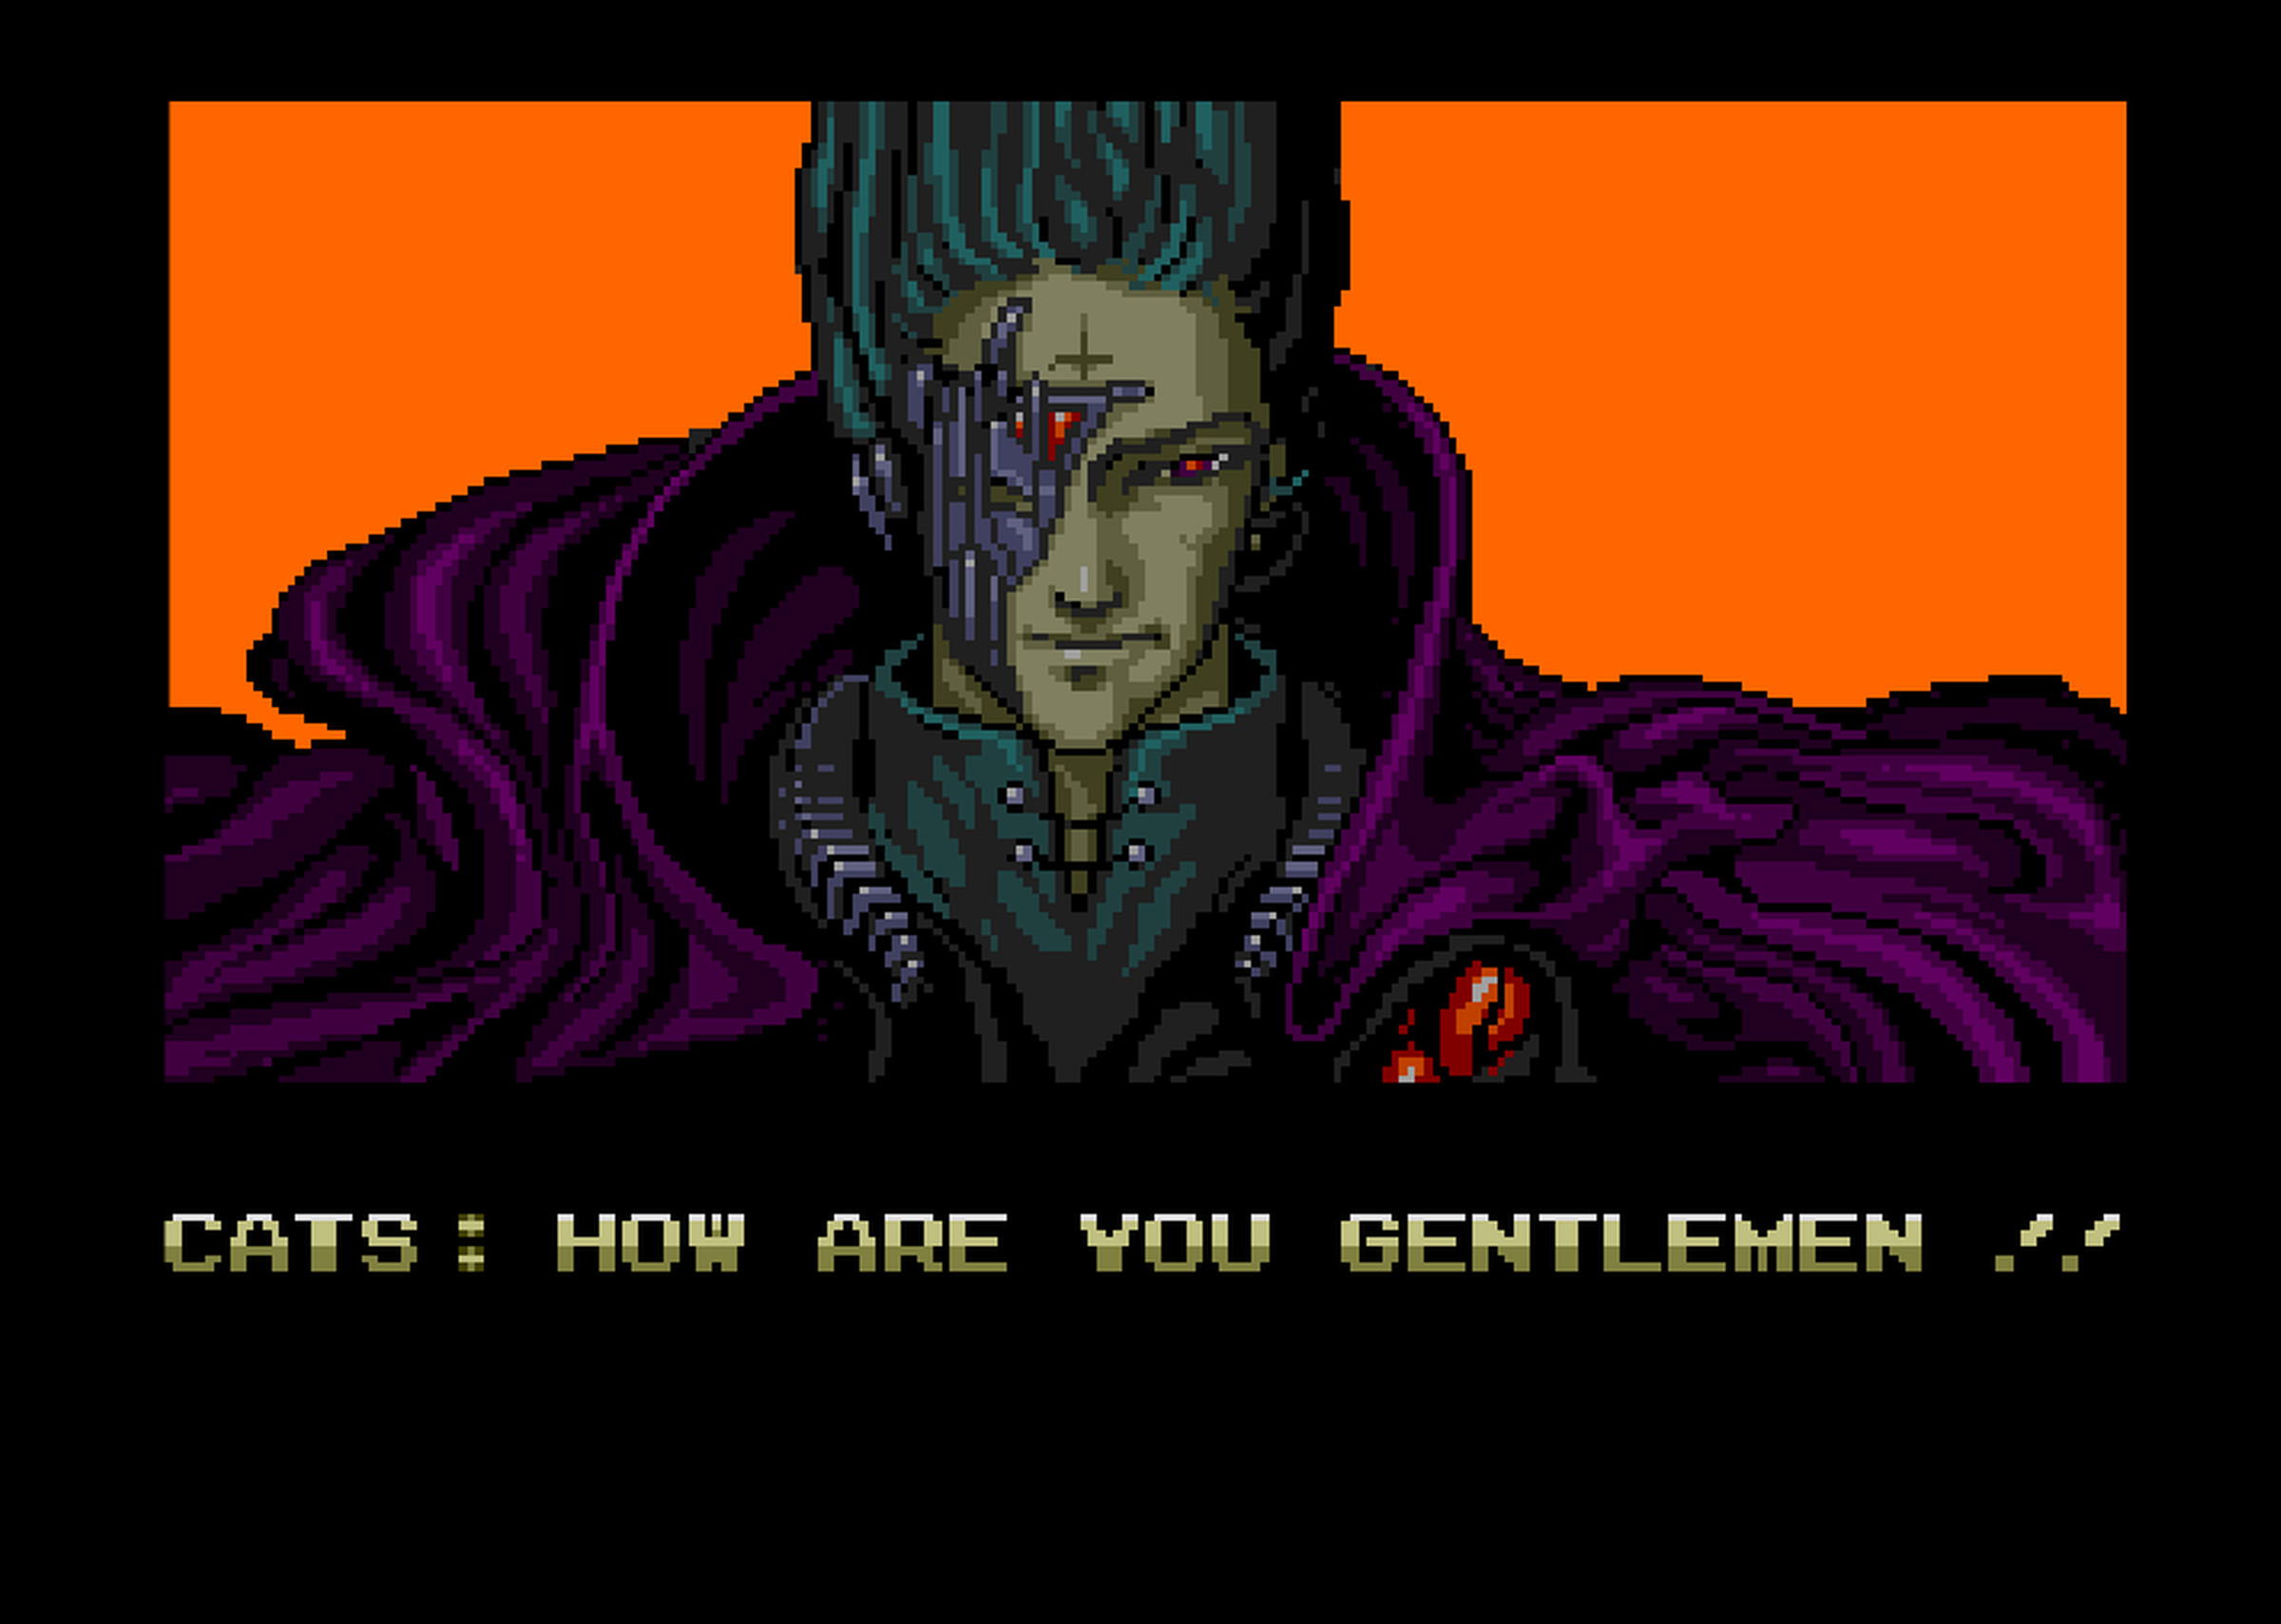 “All your base are belong to us” is a classic Flash video based on the infamous English translation of the game Zero Wing.